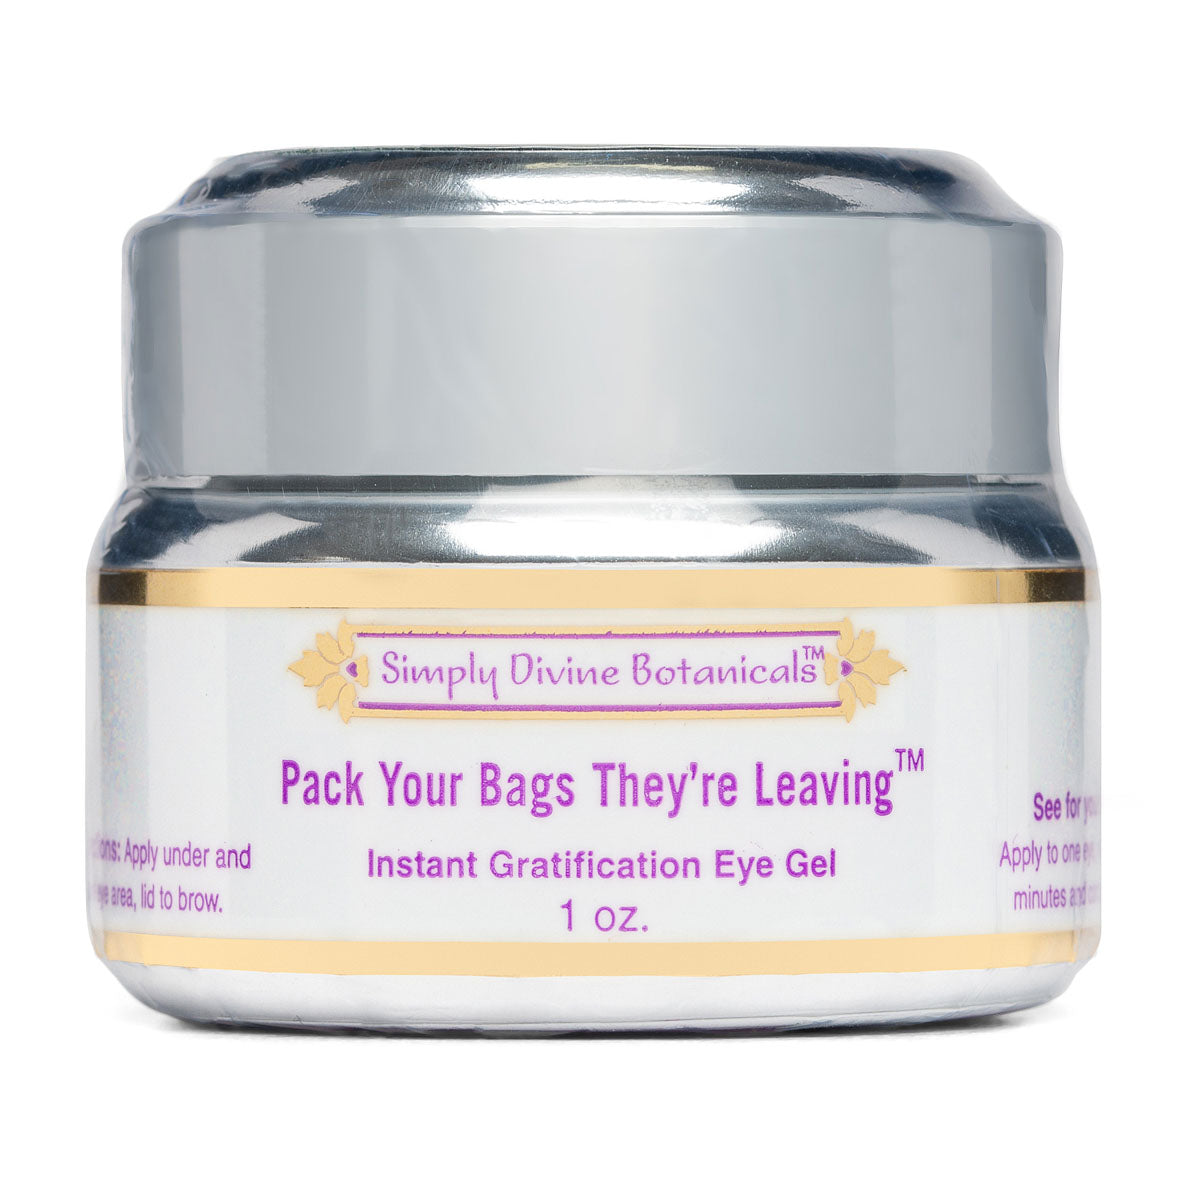 Packs Your Bags They&#39;re Leaving Eye Gel | Simply Divine Botanicals | Raw Living UK | Skin Care &amp; Beauty | Simply Divine Botanicals Pack Your Bags They&#39;re Leaving Natural Eye Gel: this eye gel was created to reduce puffiness under &amp; above eye area.